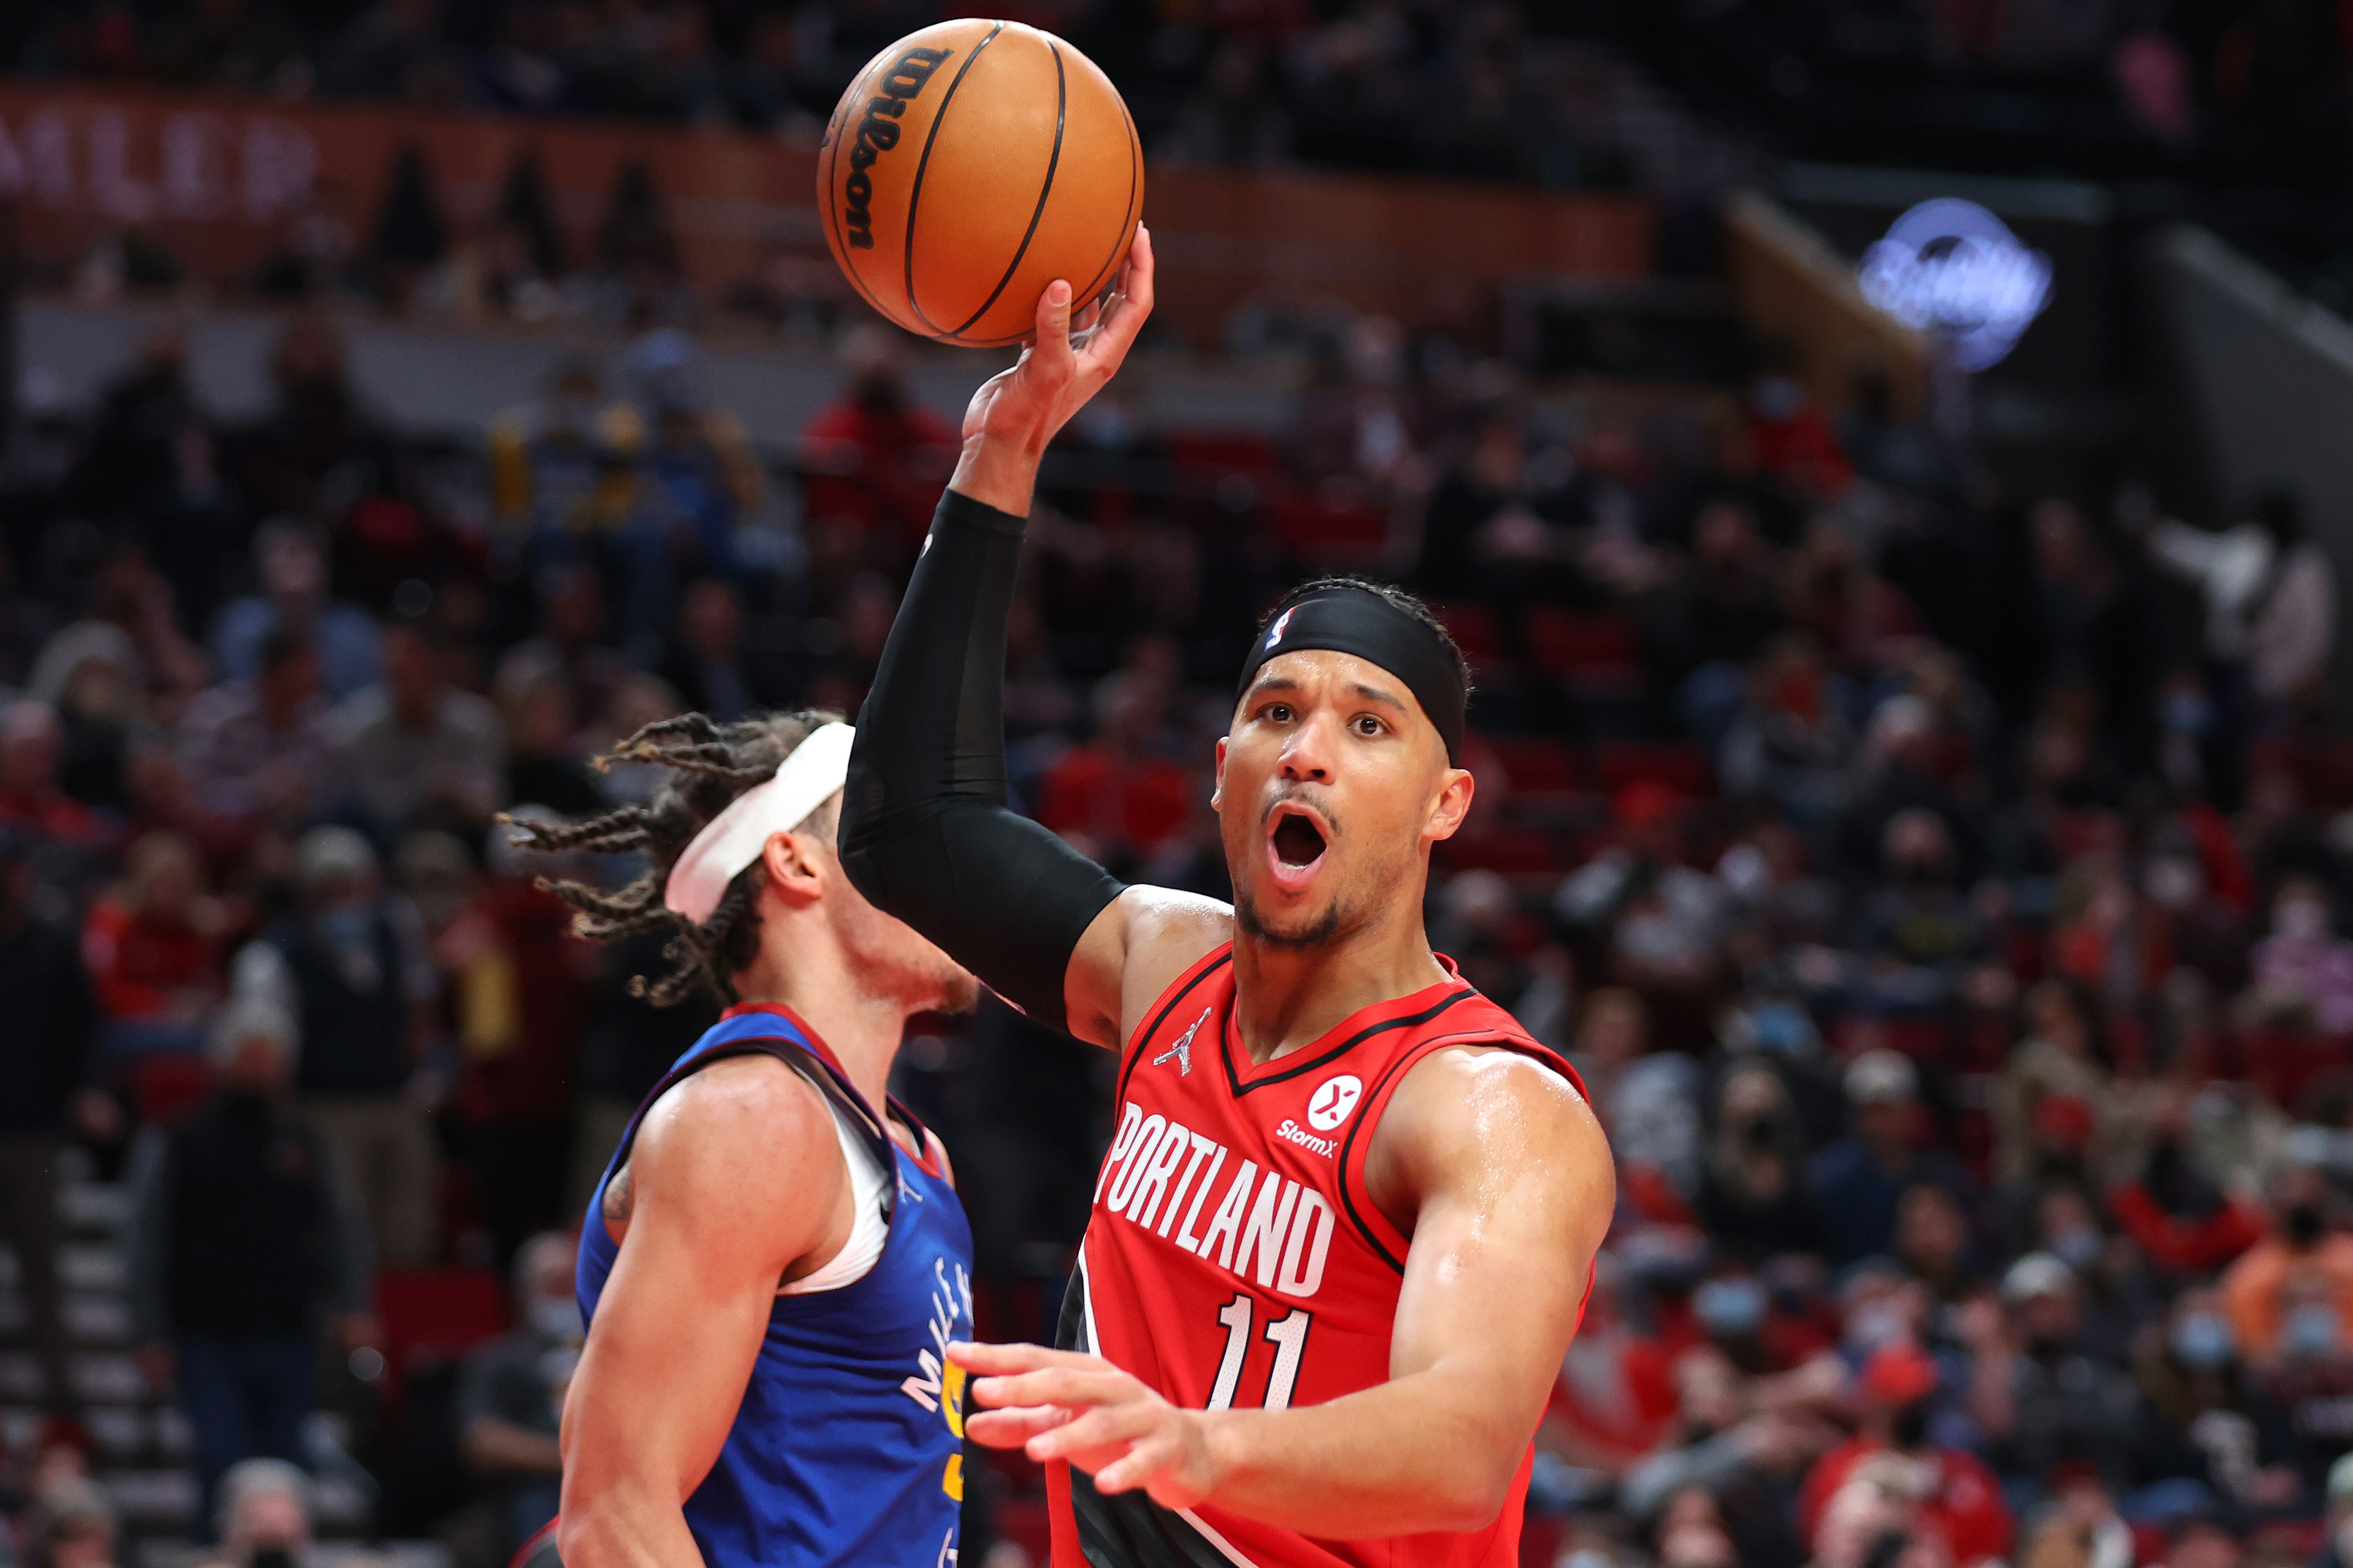 Portland Trail Blazers guard Josh Hart reacts during an NBA game against the Denver Nuggets in February 2022